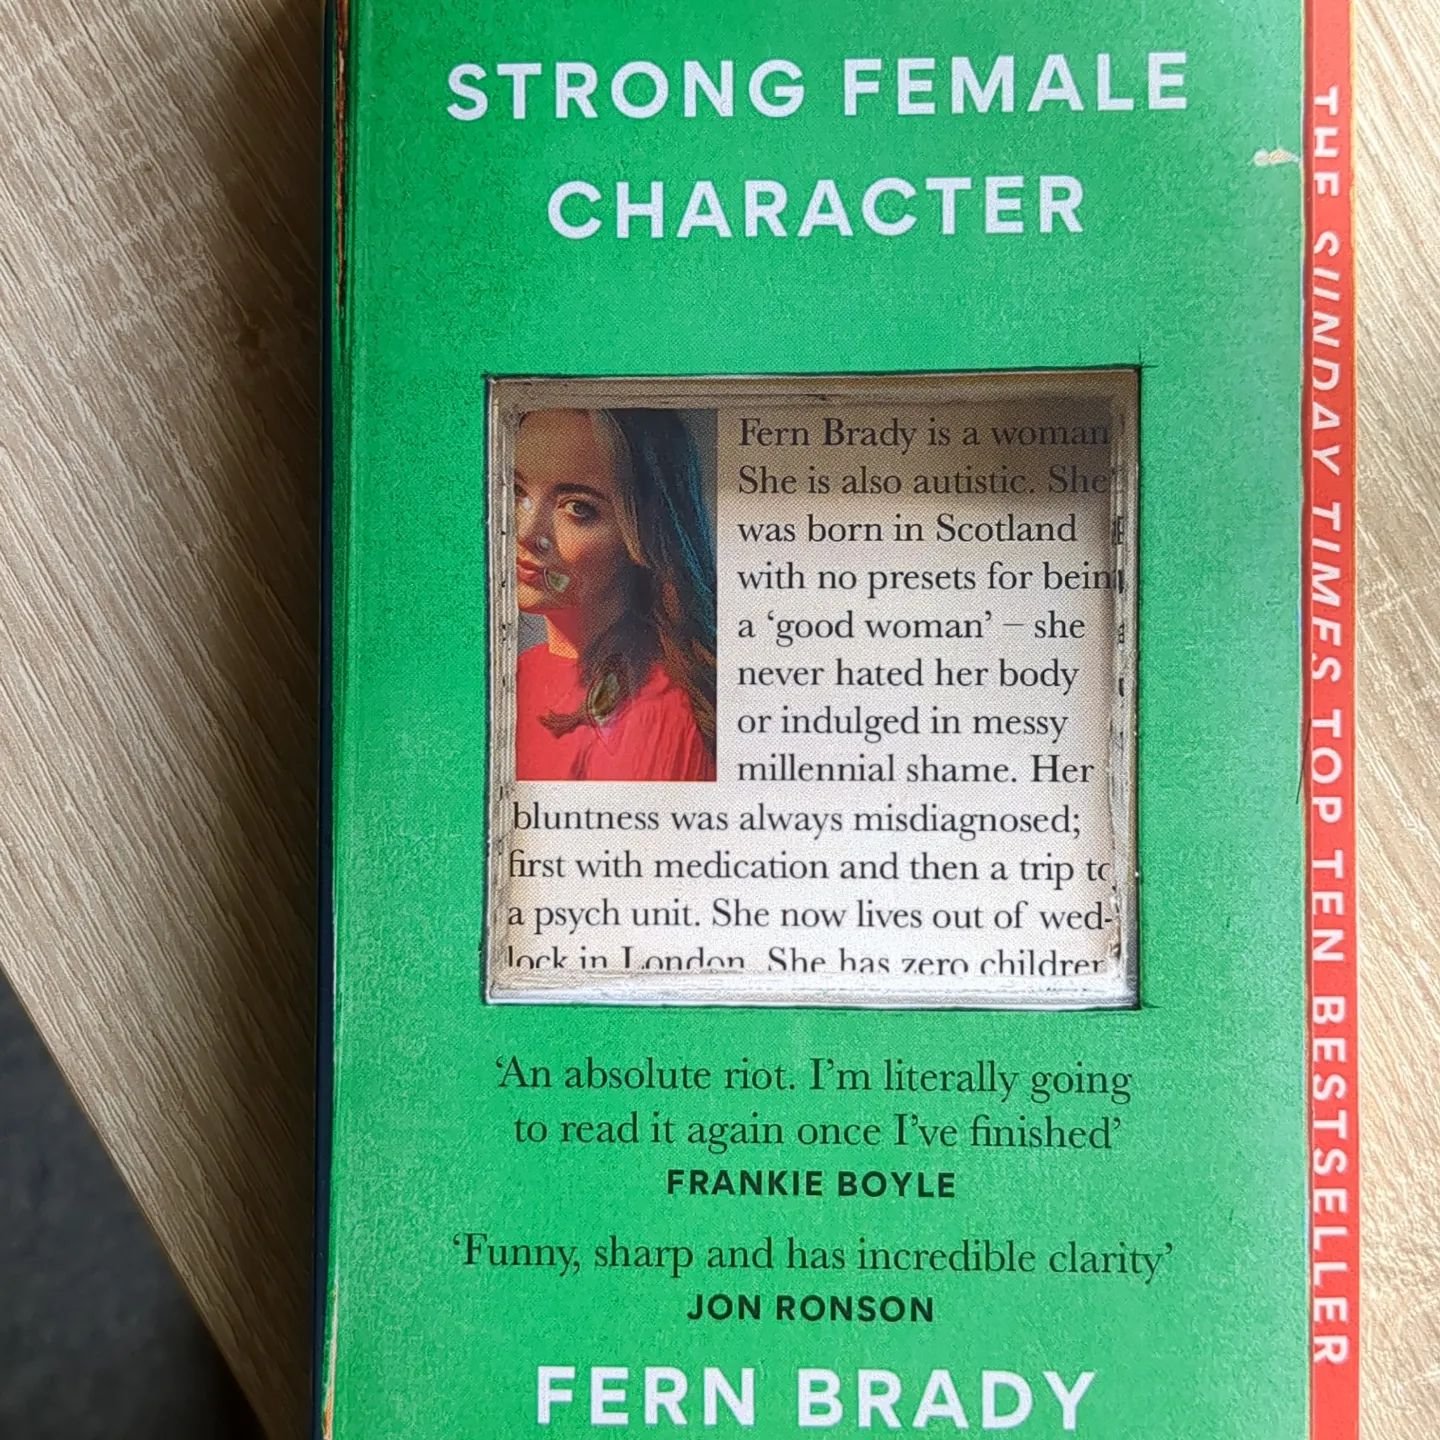 Incredible book about Fern's struggle for recognition of her autism and how it impacted her life. 

#mentalhealth #autism #autismbooks #fernbrady #strongfemalecharacter #personalexperience #highlyrecommended #mentalhealthbooks #sexualviolencesupport 